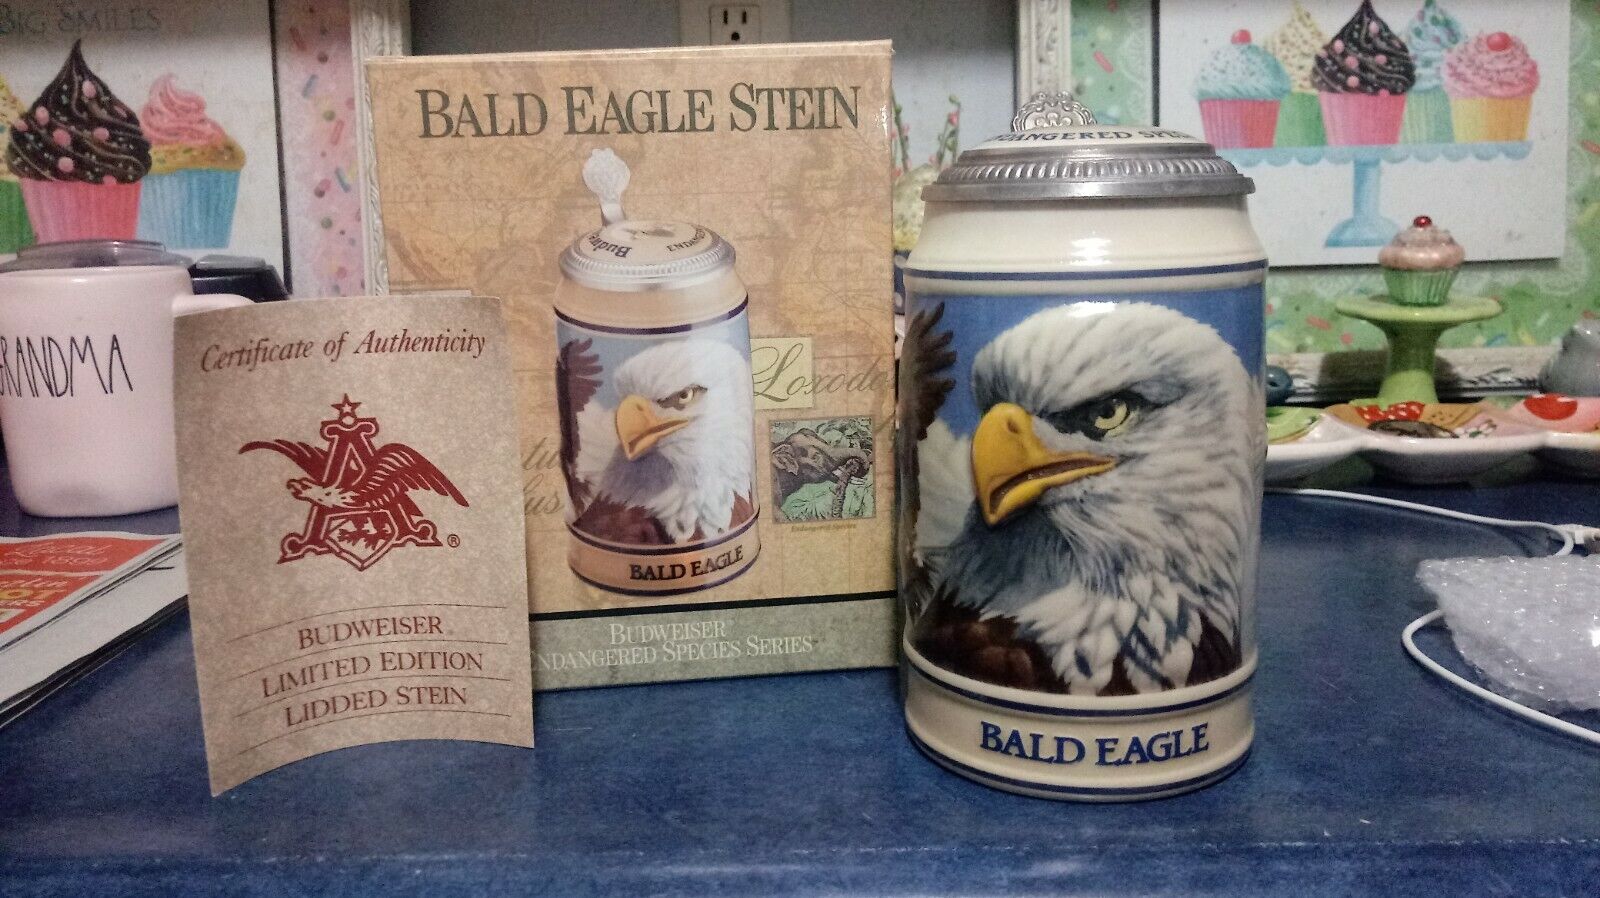 1989 BUDWEISER BEER ENDANGERED SPECIES EAGLE STEIN FRESH OUT OF CASE MIB